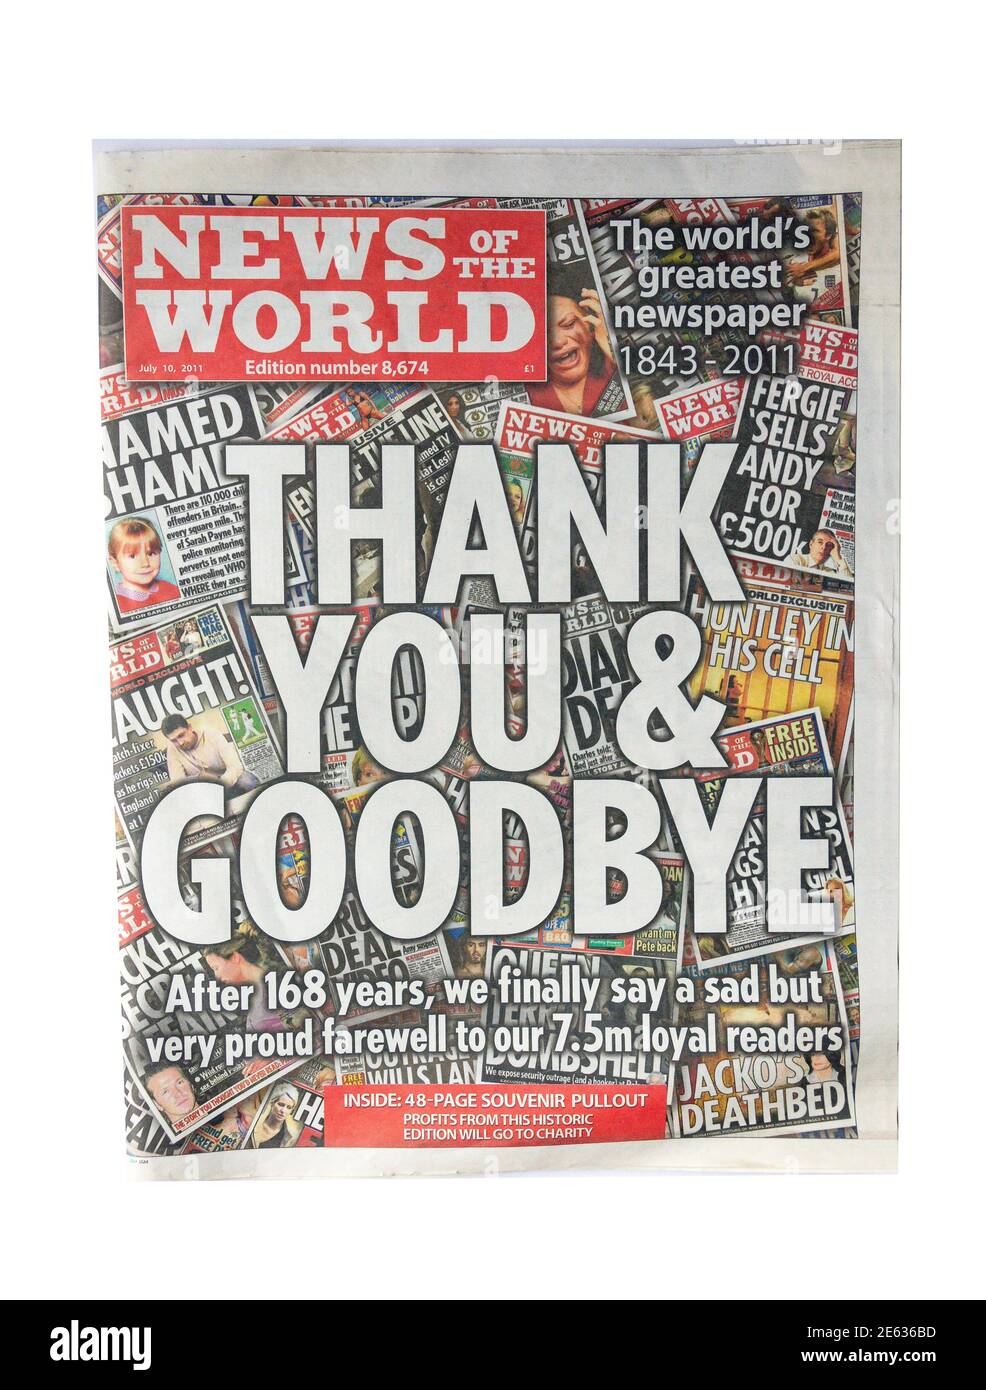 Final edition of The News of the World newspaper July 10th 2011, Greater London, England, United Kingdom Stock Photo